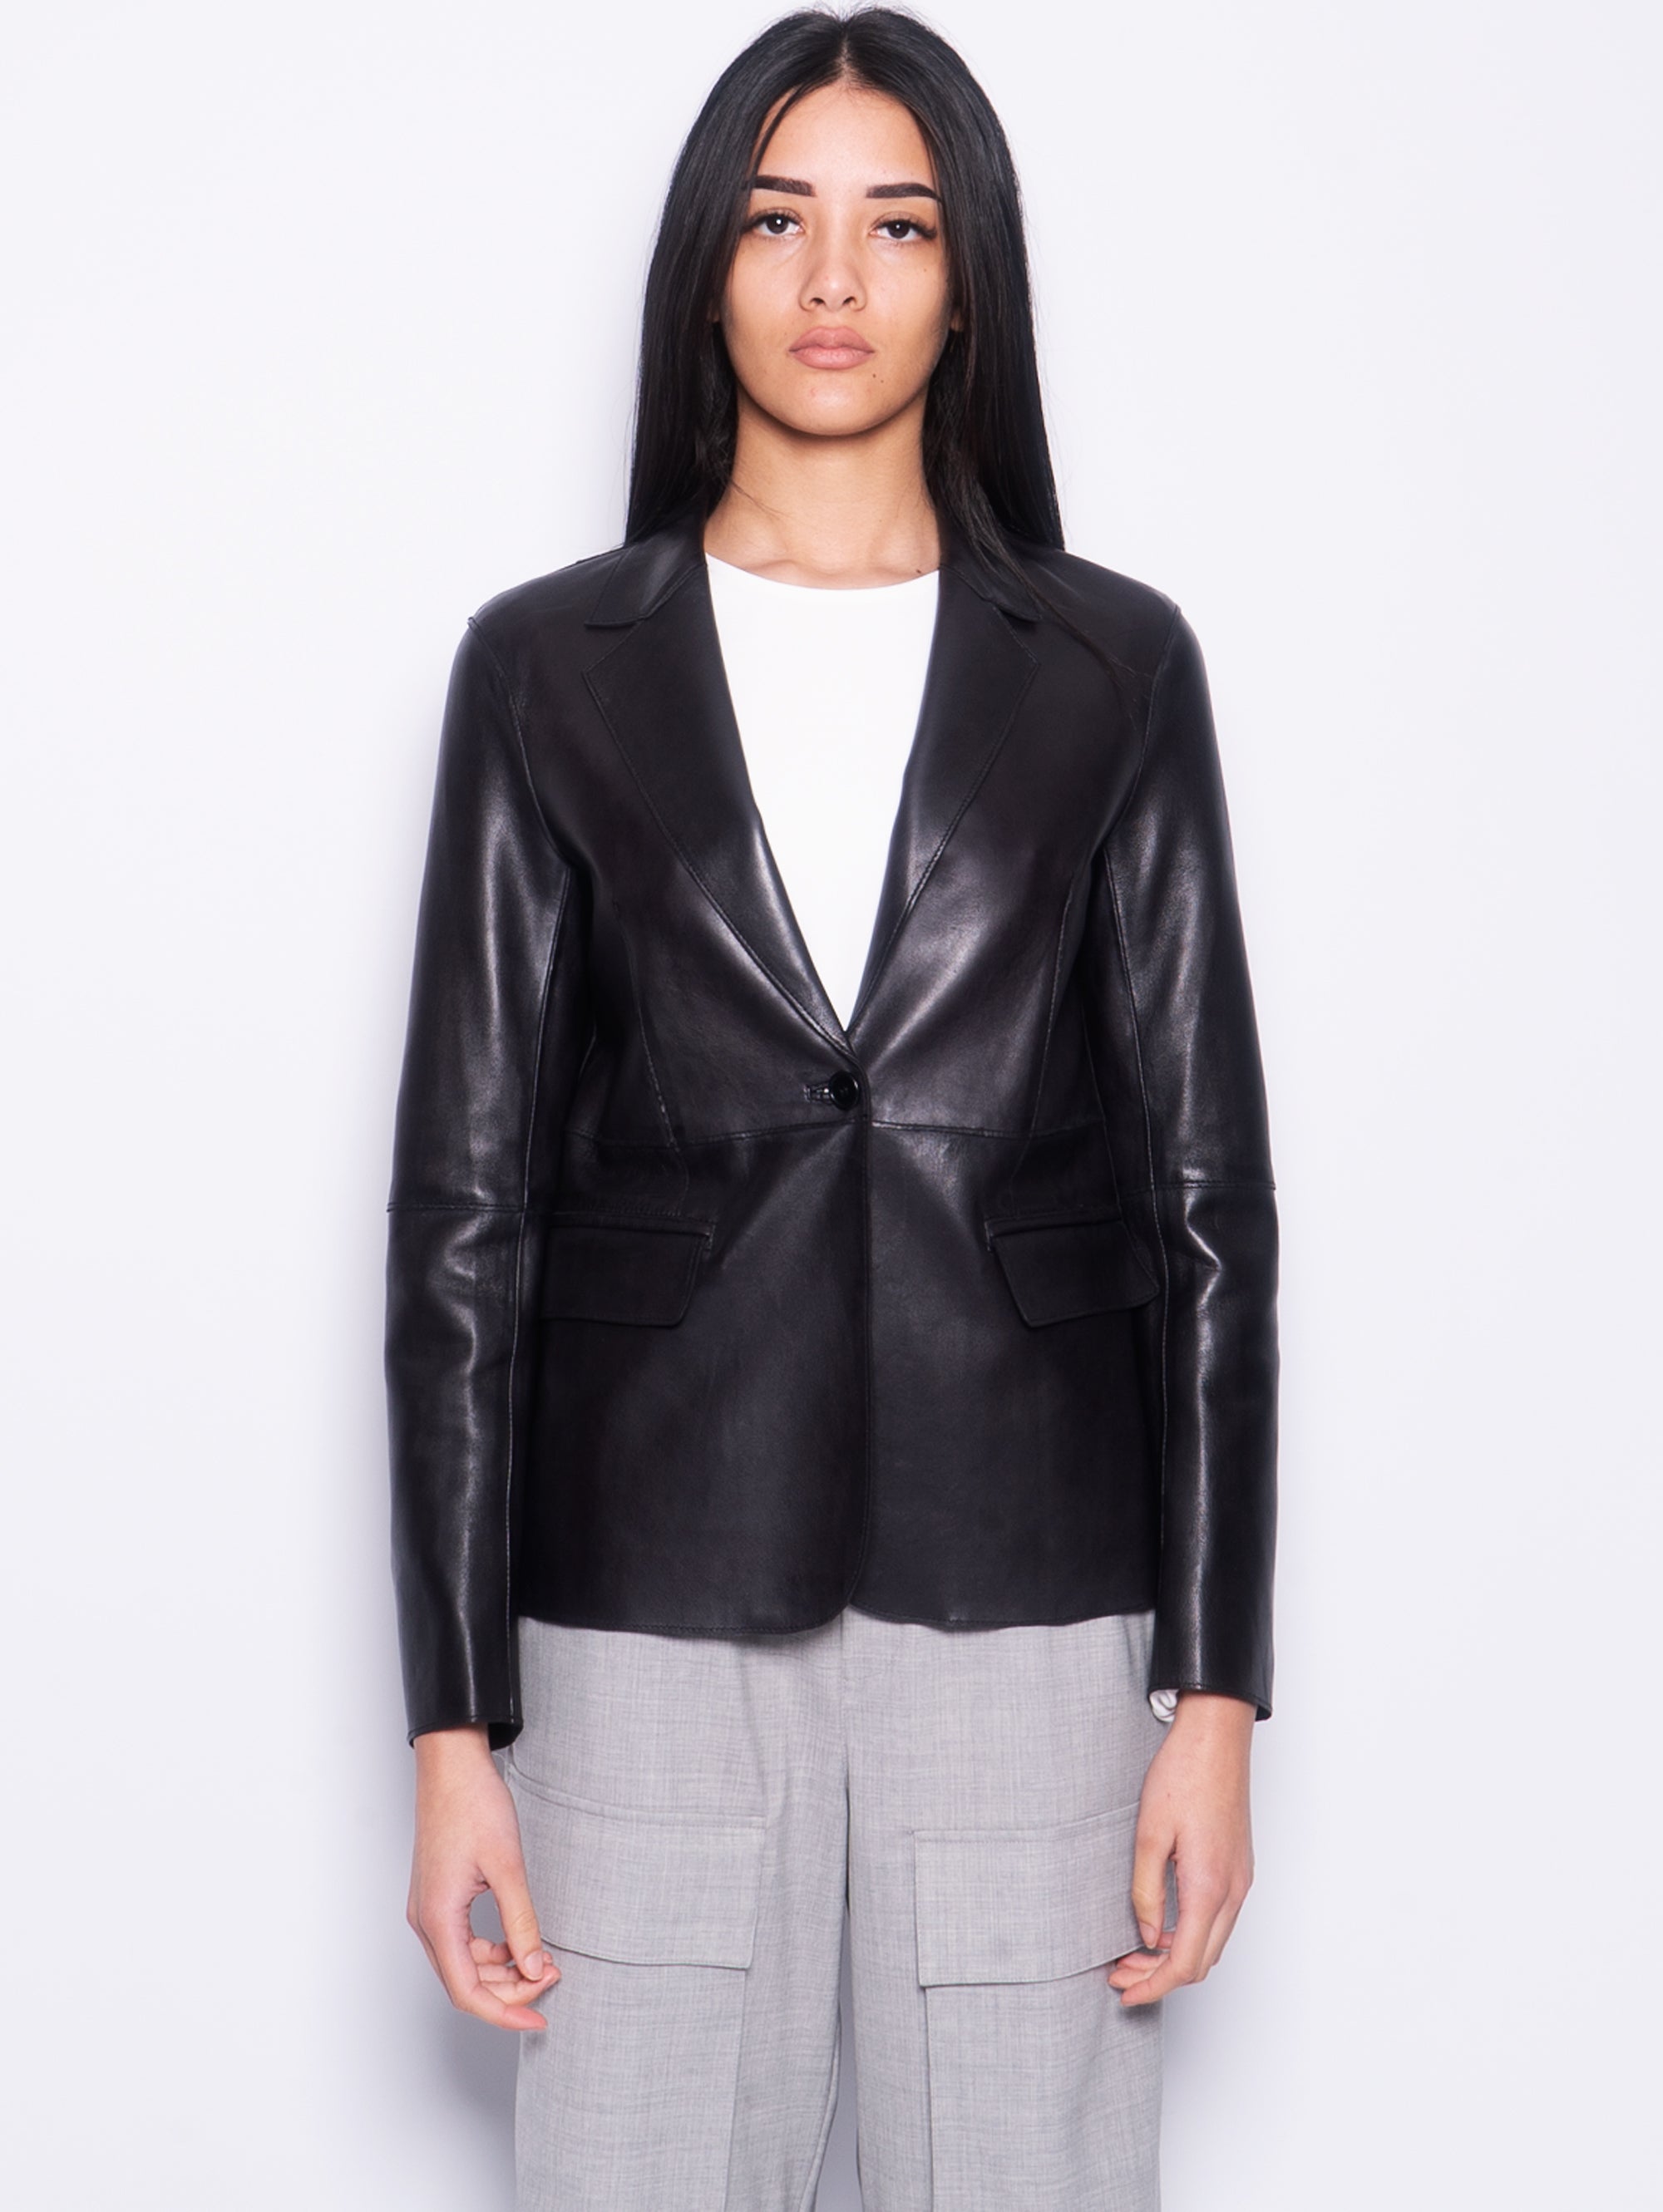 P.A.R.O.S.H.-Giacca Blazer in Pelle Nero-TRYME Shop